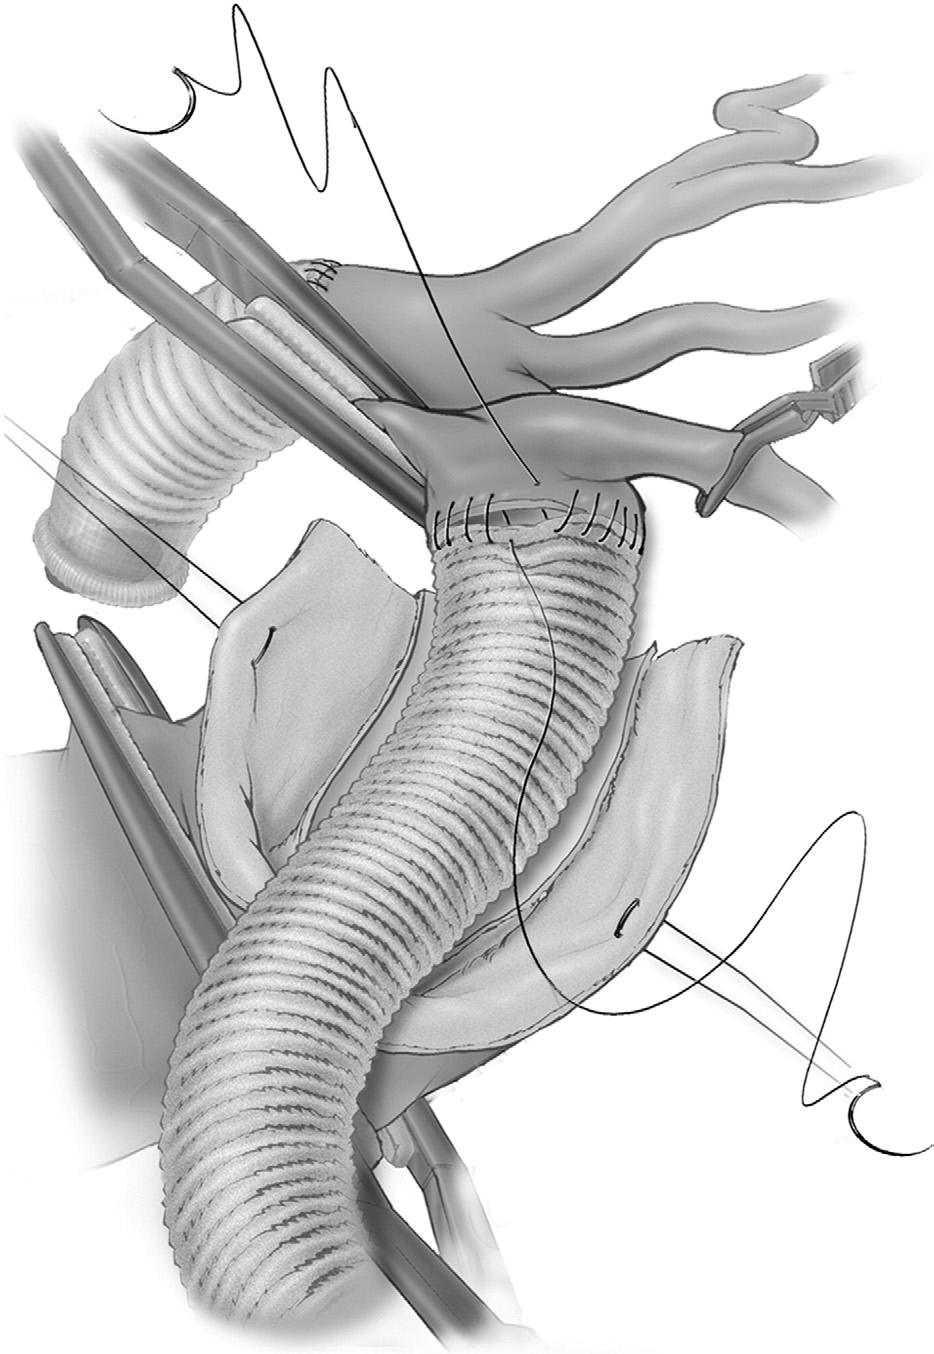 76 J. Huh et al Figure 6 Proximal anastomosis to a Dacron graft is completed by using 3-0 polypropylene suture.